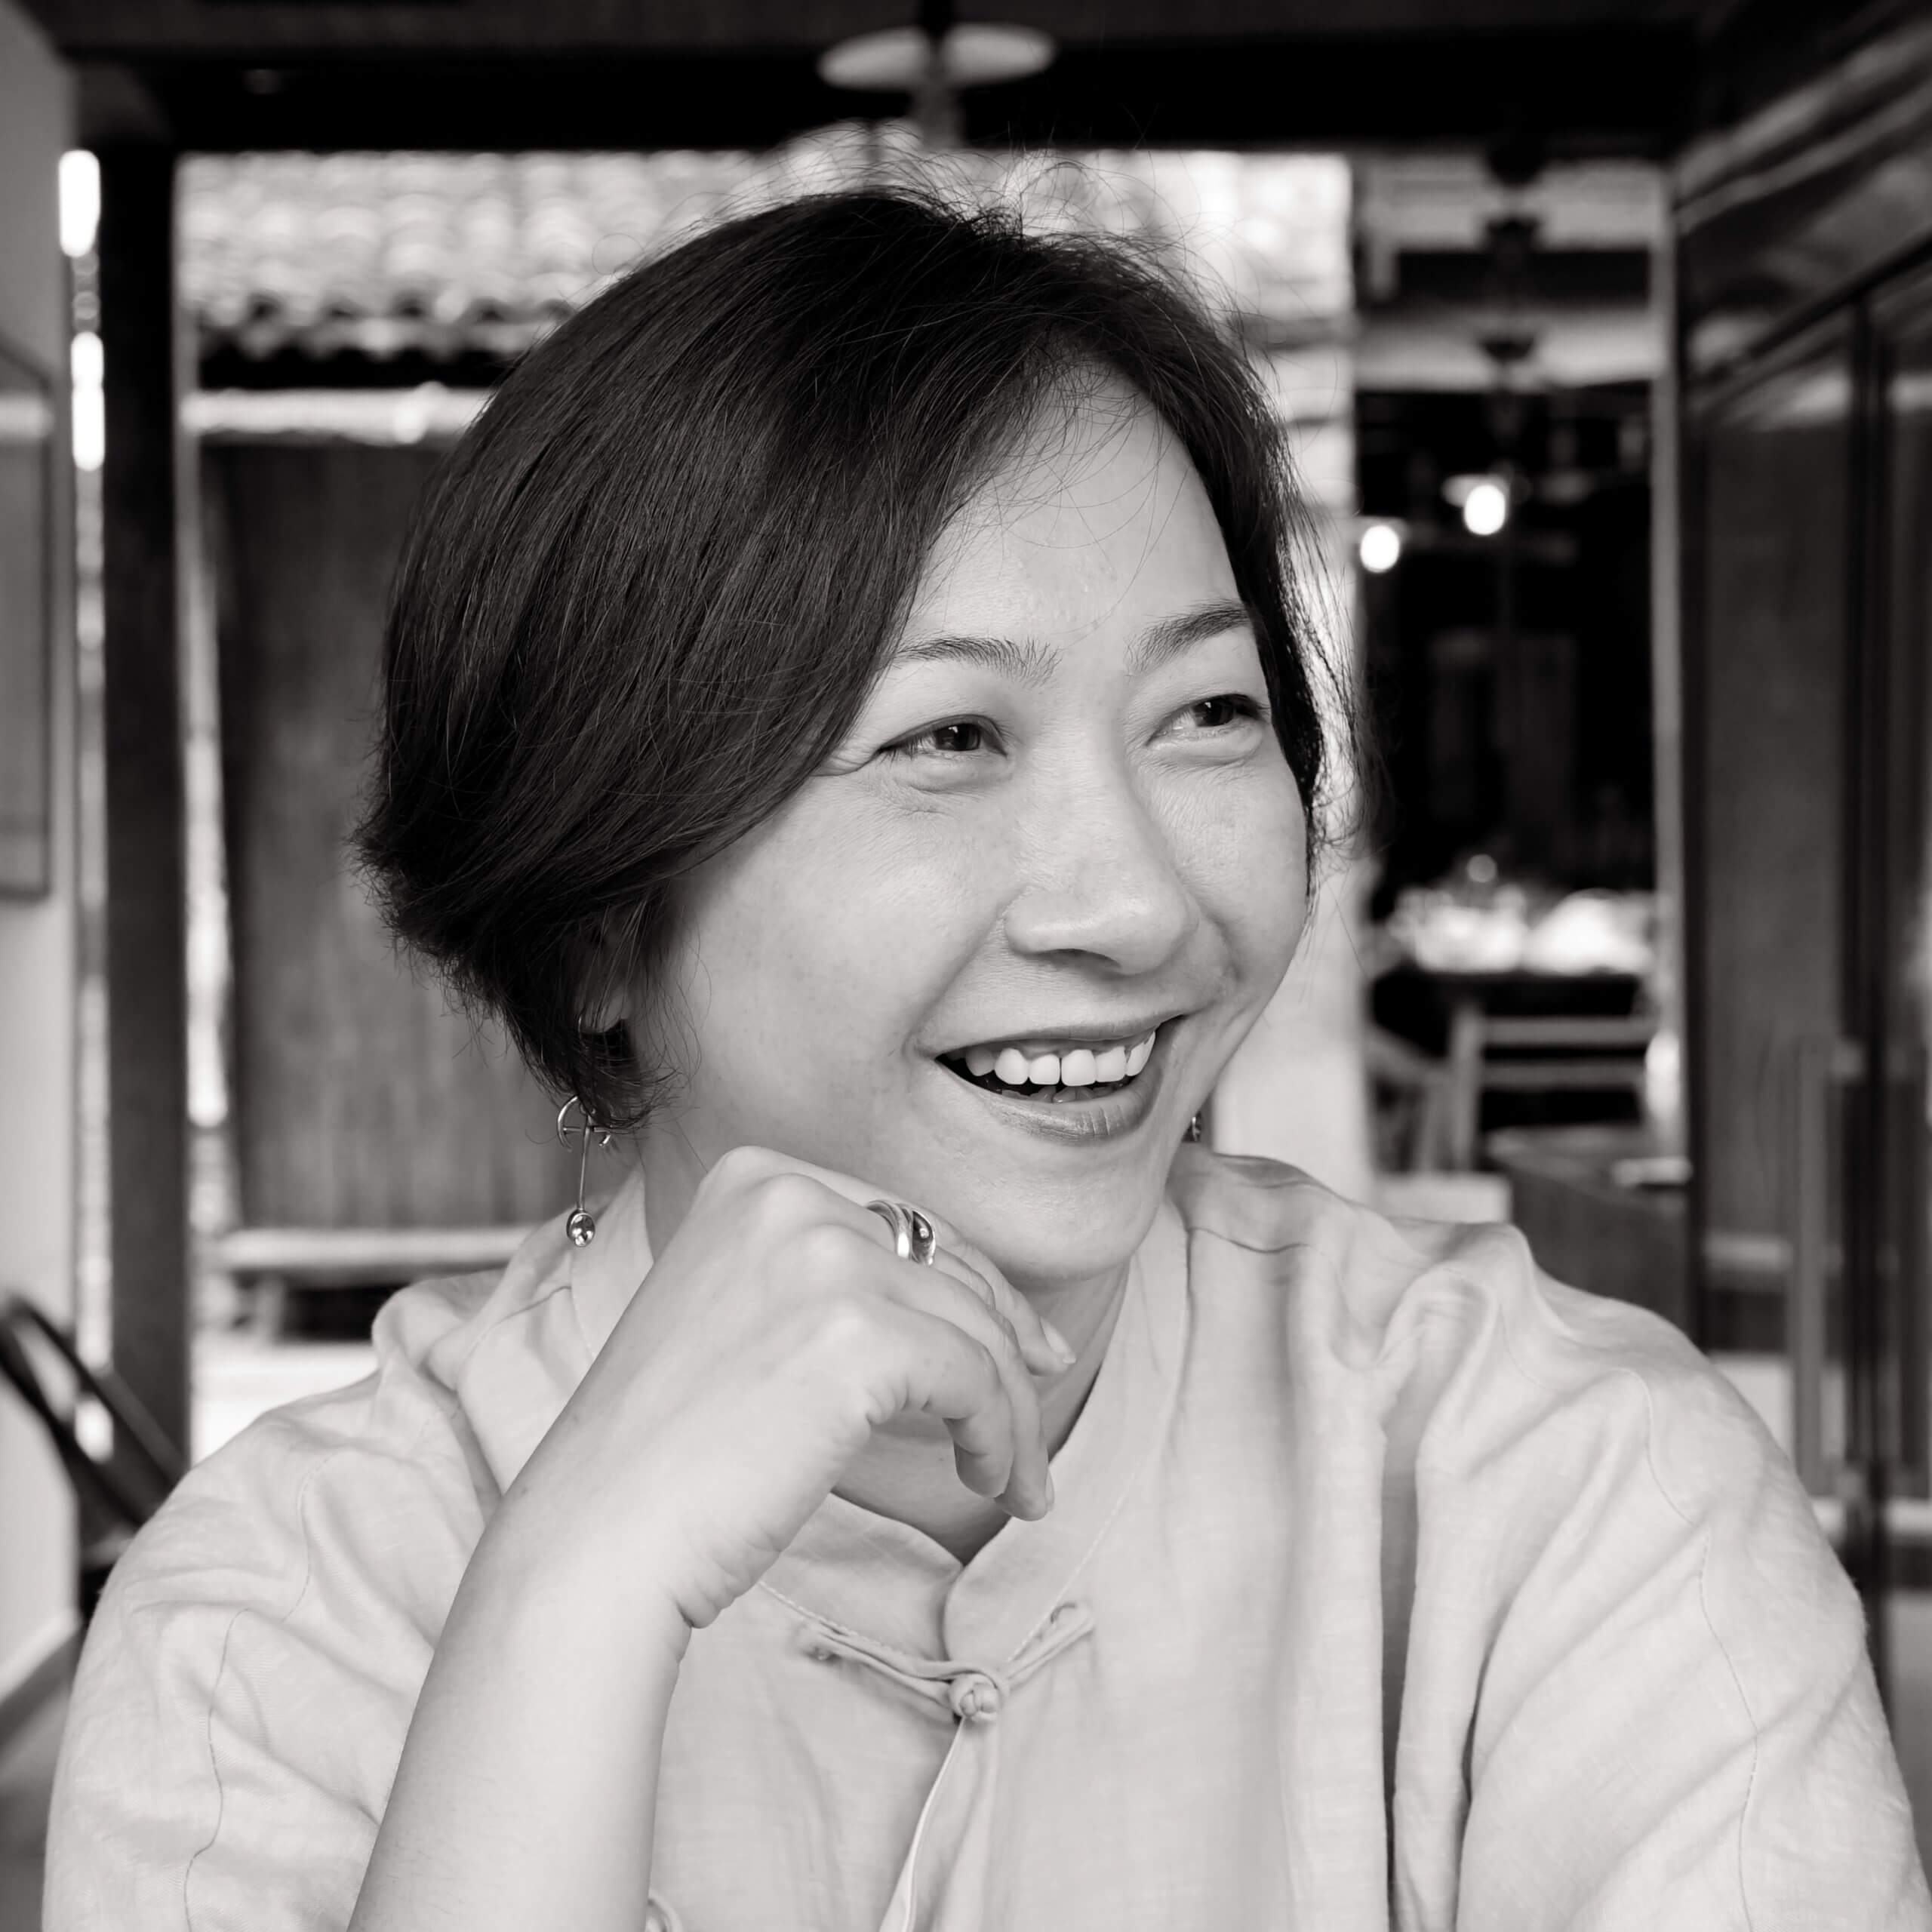 Qing Zhao looking to her side and smiling. She has short dark hair, and is wearing a light-colored blouse. Black and white portrait, with out of focus background.